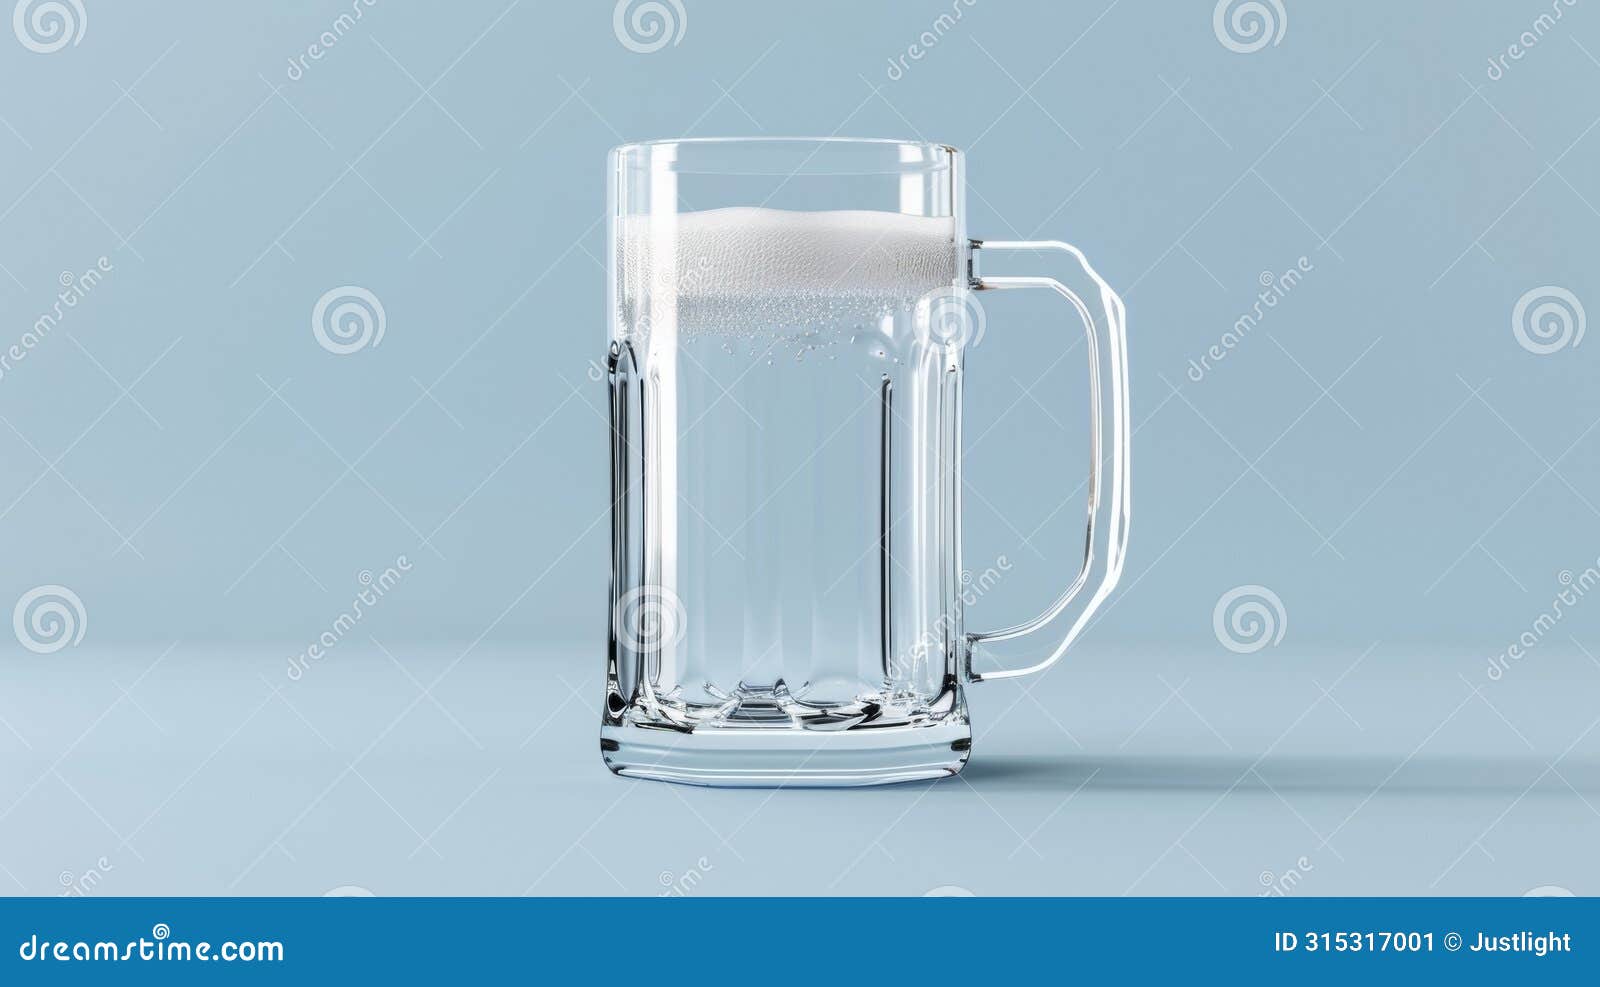 blank mockup of a thick heavyduty beer mug made of durable plastic ideal for parties and events.